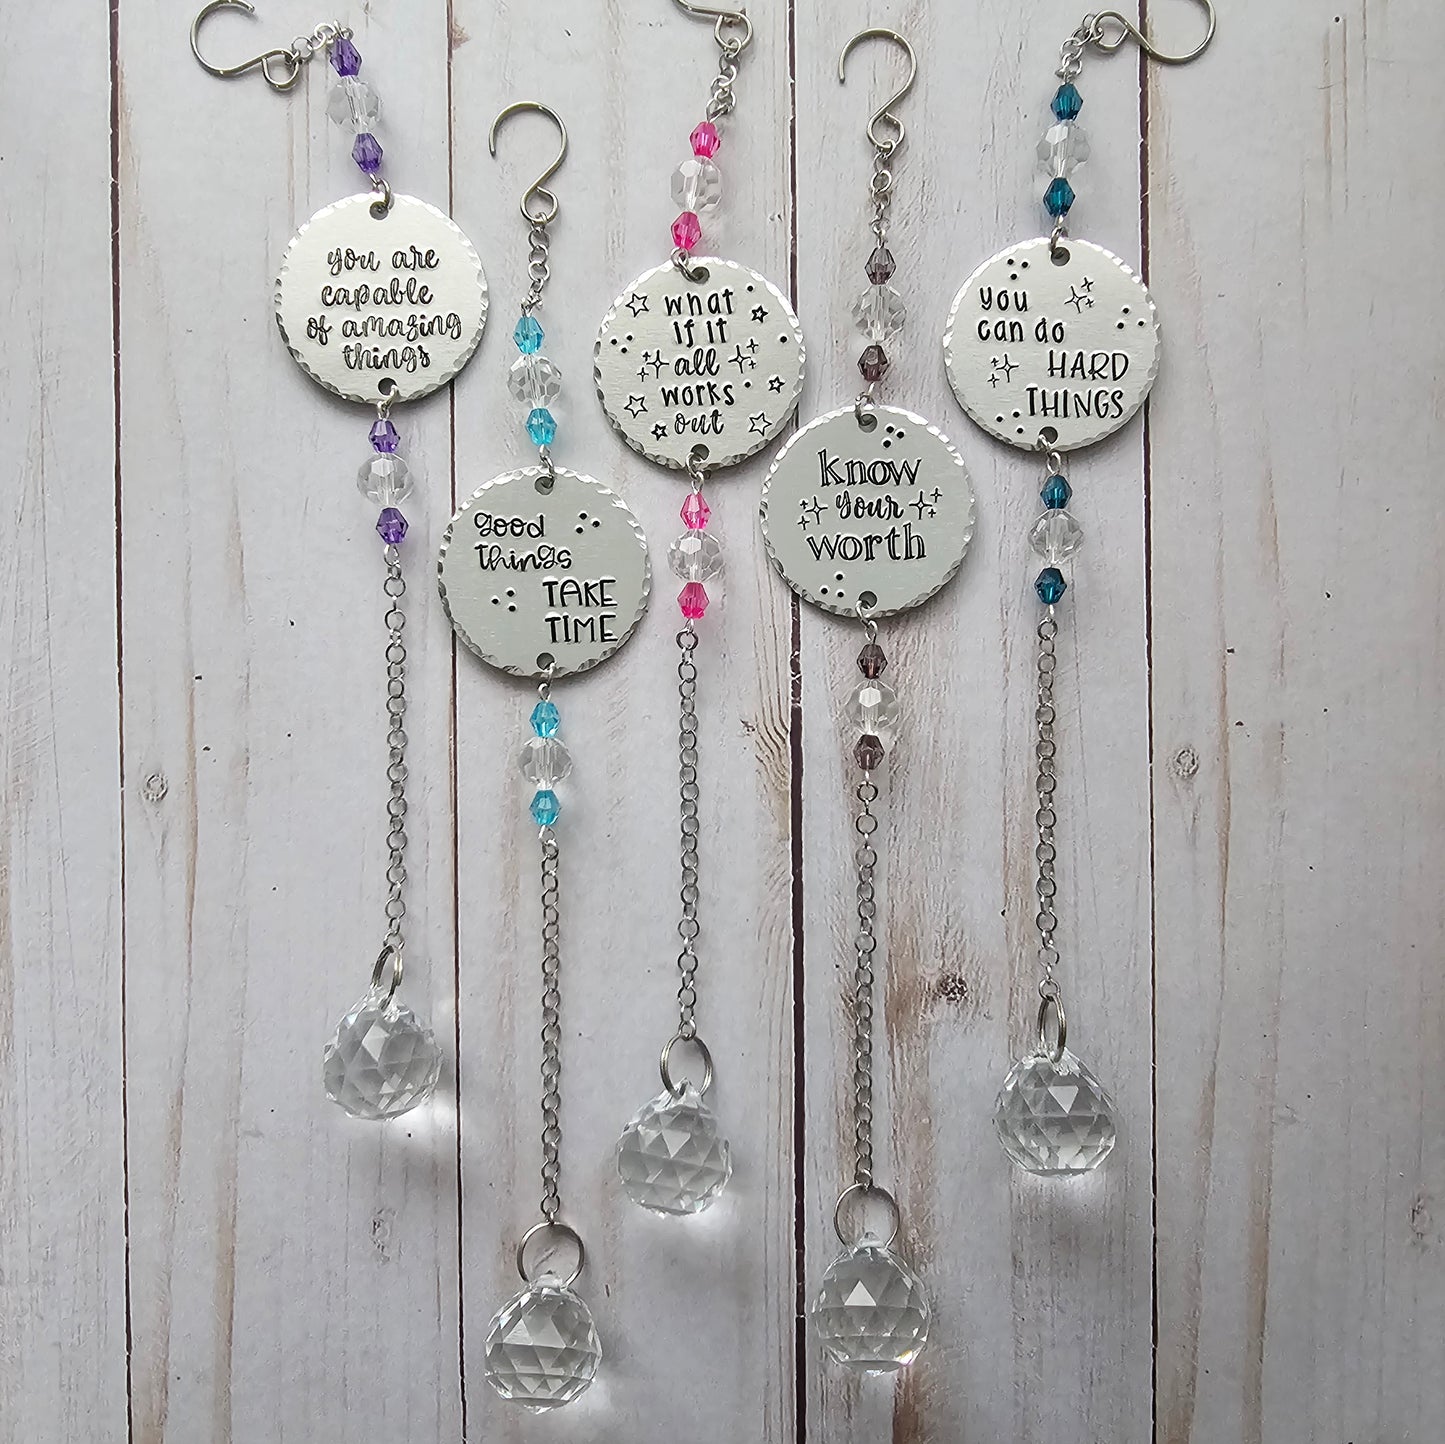 An image showing 5 suncatchers. Each suncatcher contains 2 sets of crystal beads, a round metal disc that is  handstamped with a quote, chain, and a large crystal.